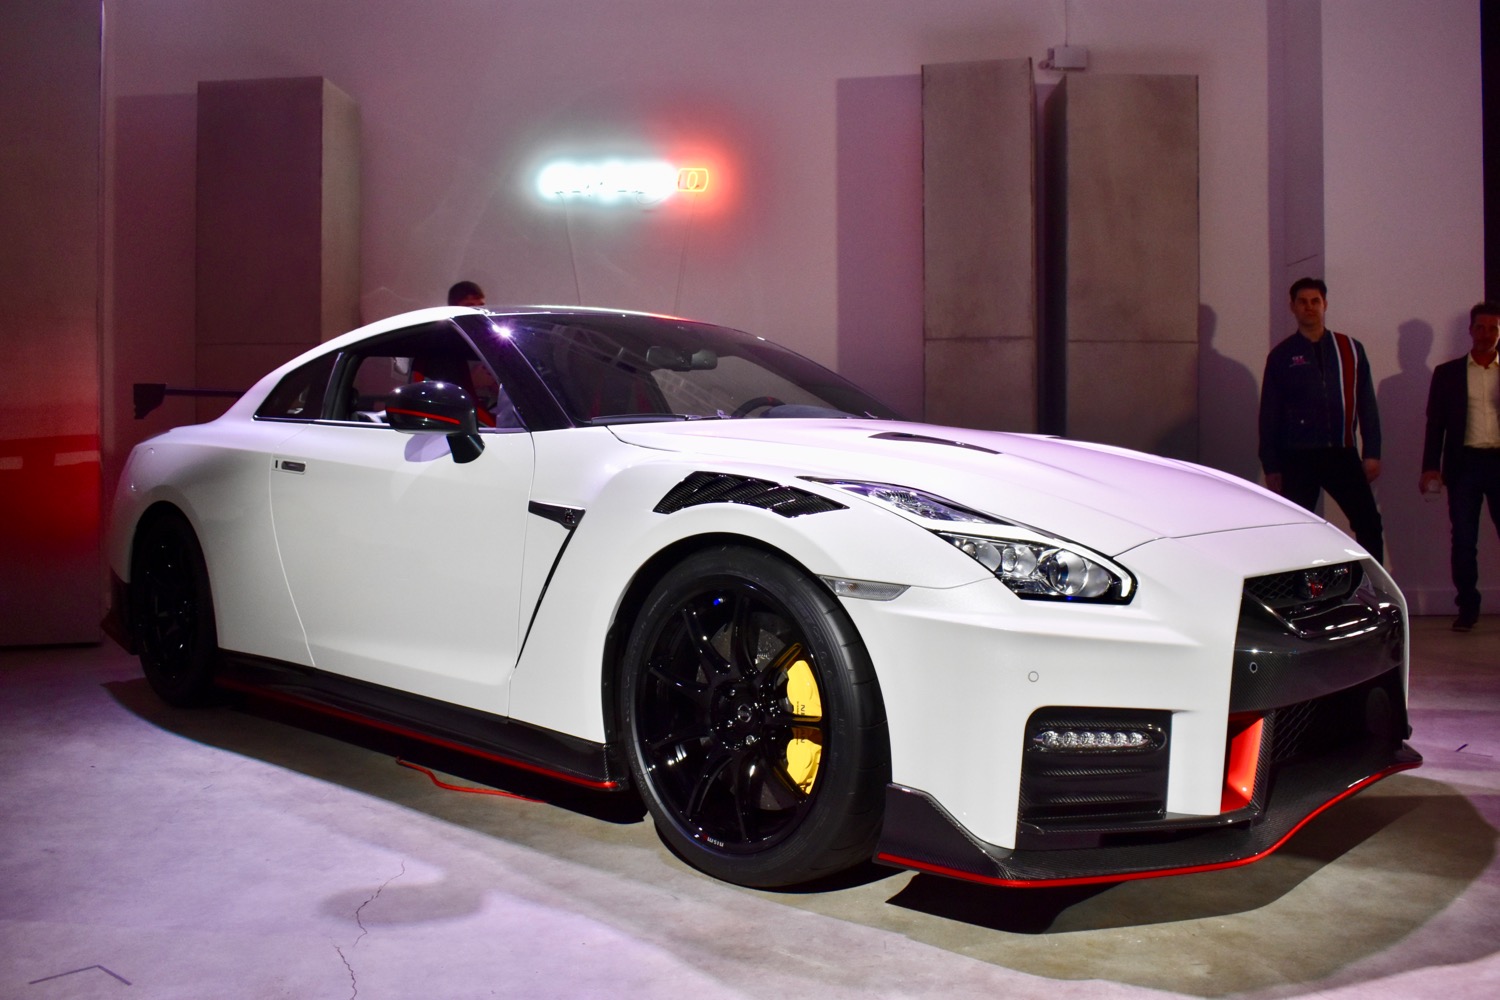 Nissan and NISMO offer first look at 2020-spec Nissan GT-R NISMO GT500